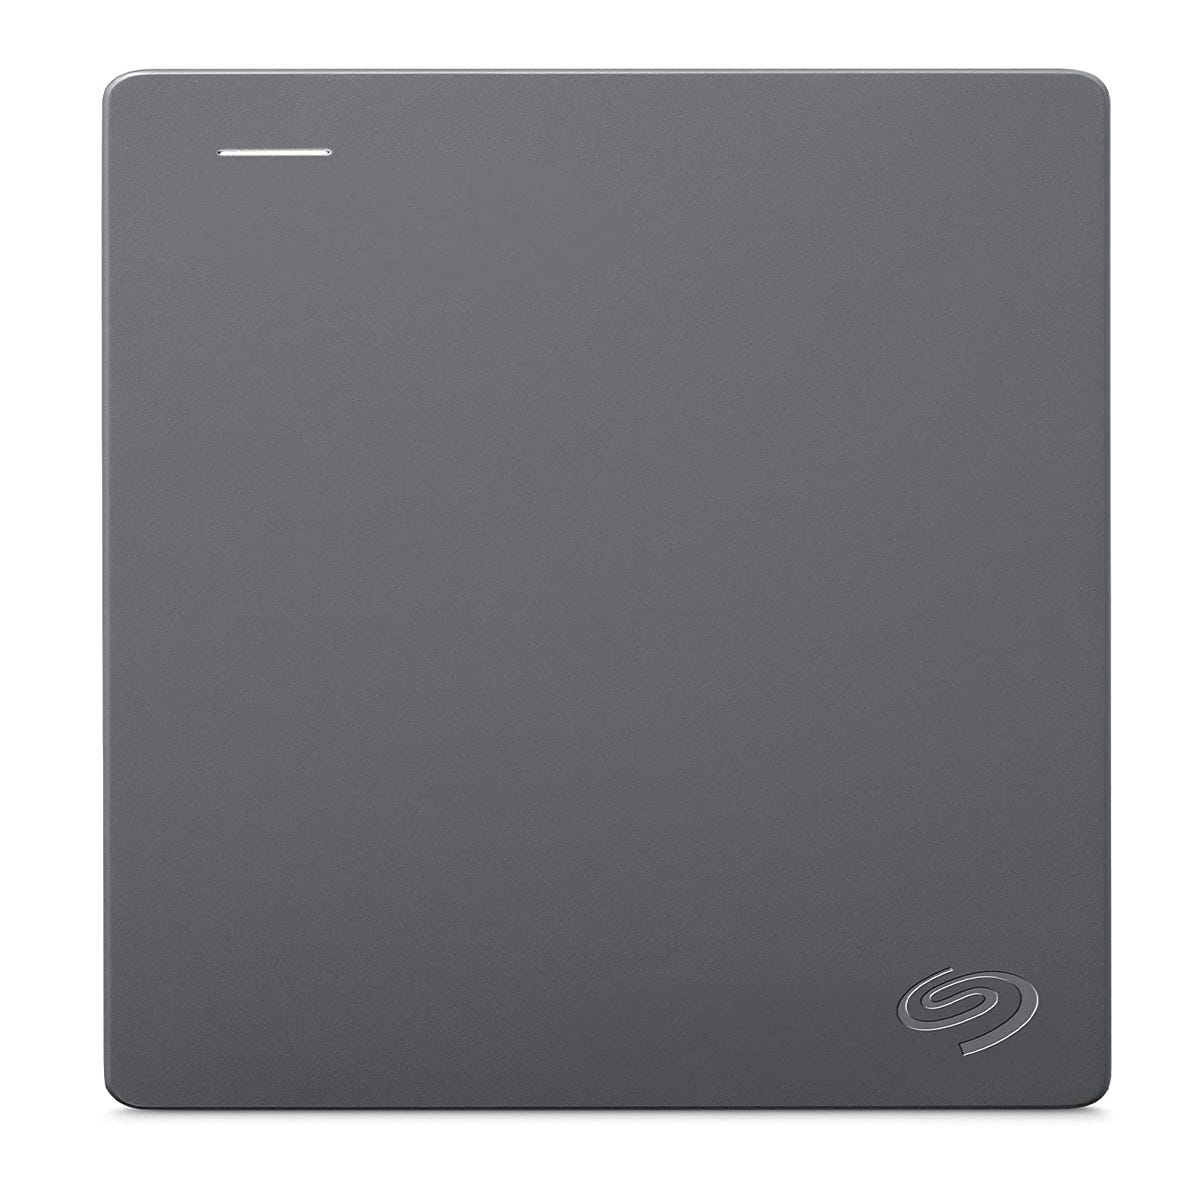 Disque Dur Externe 2 To HDD 2, 5 Seagate Basic STJL2000400, USB